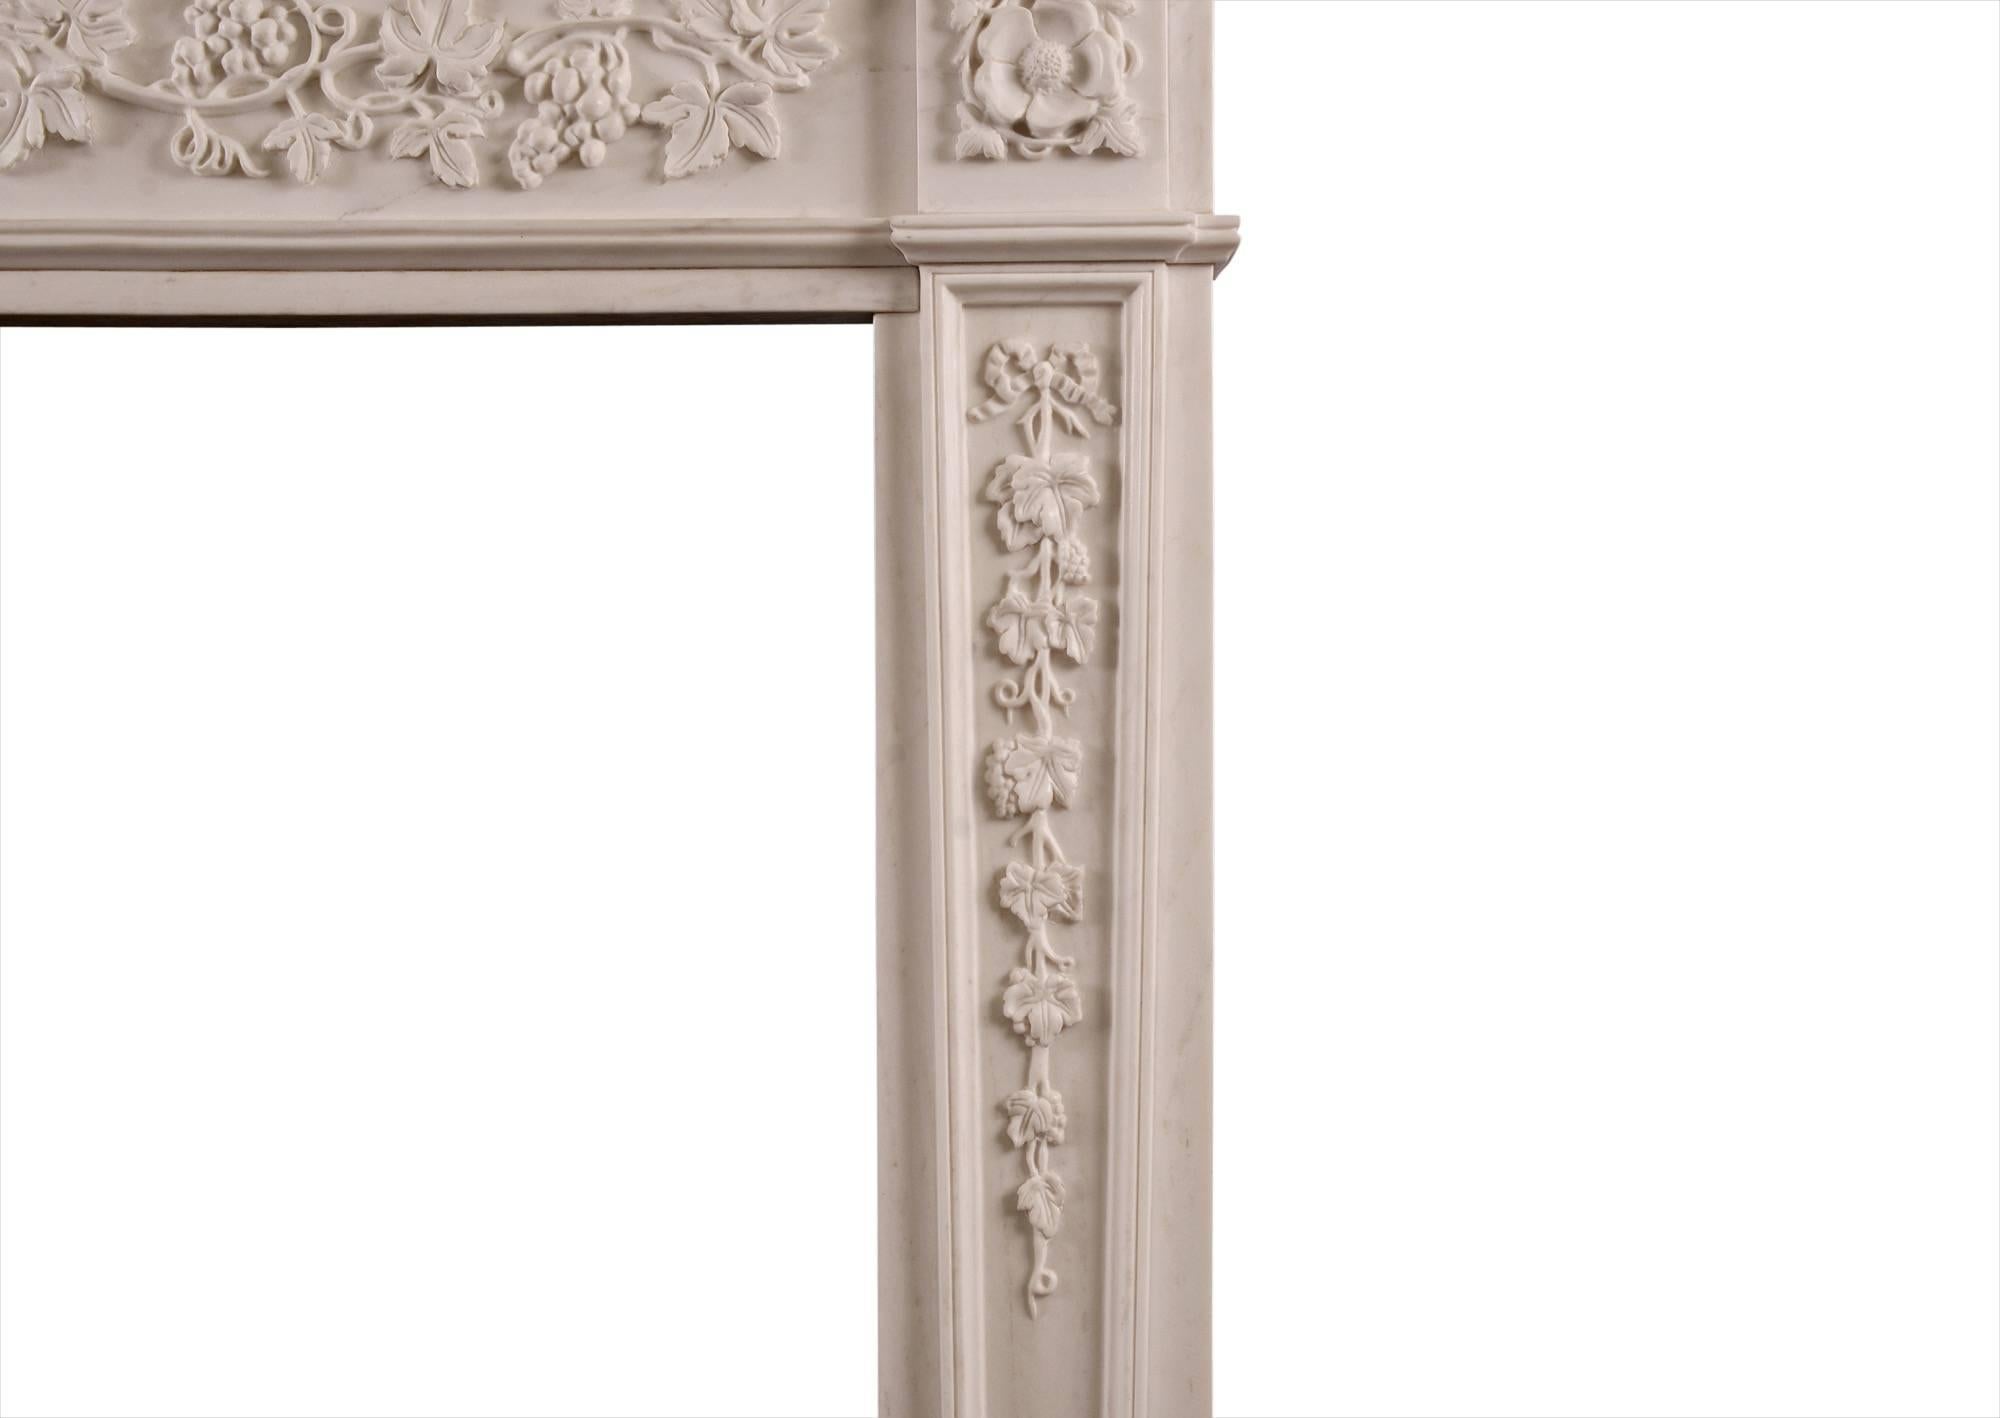 An attractive English Regency style white marble fireplace. The frieze with flowing vines and grapes, and the jambs with tapering pilasters with tie ribbons with vine leaves trailing below. The side blockings with unusual flower motif paterae. The